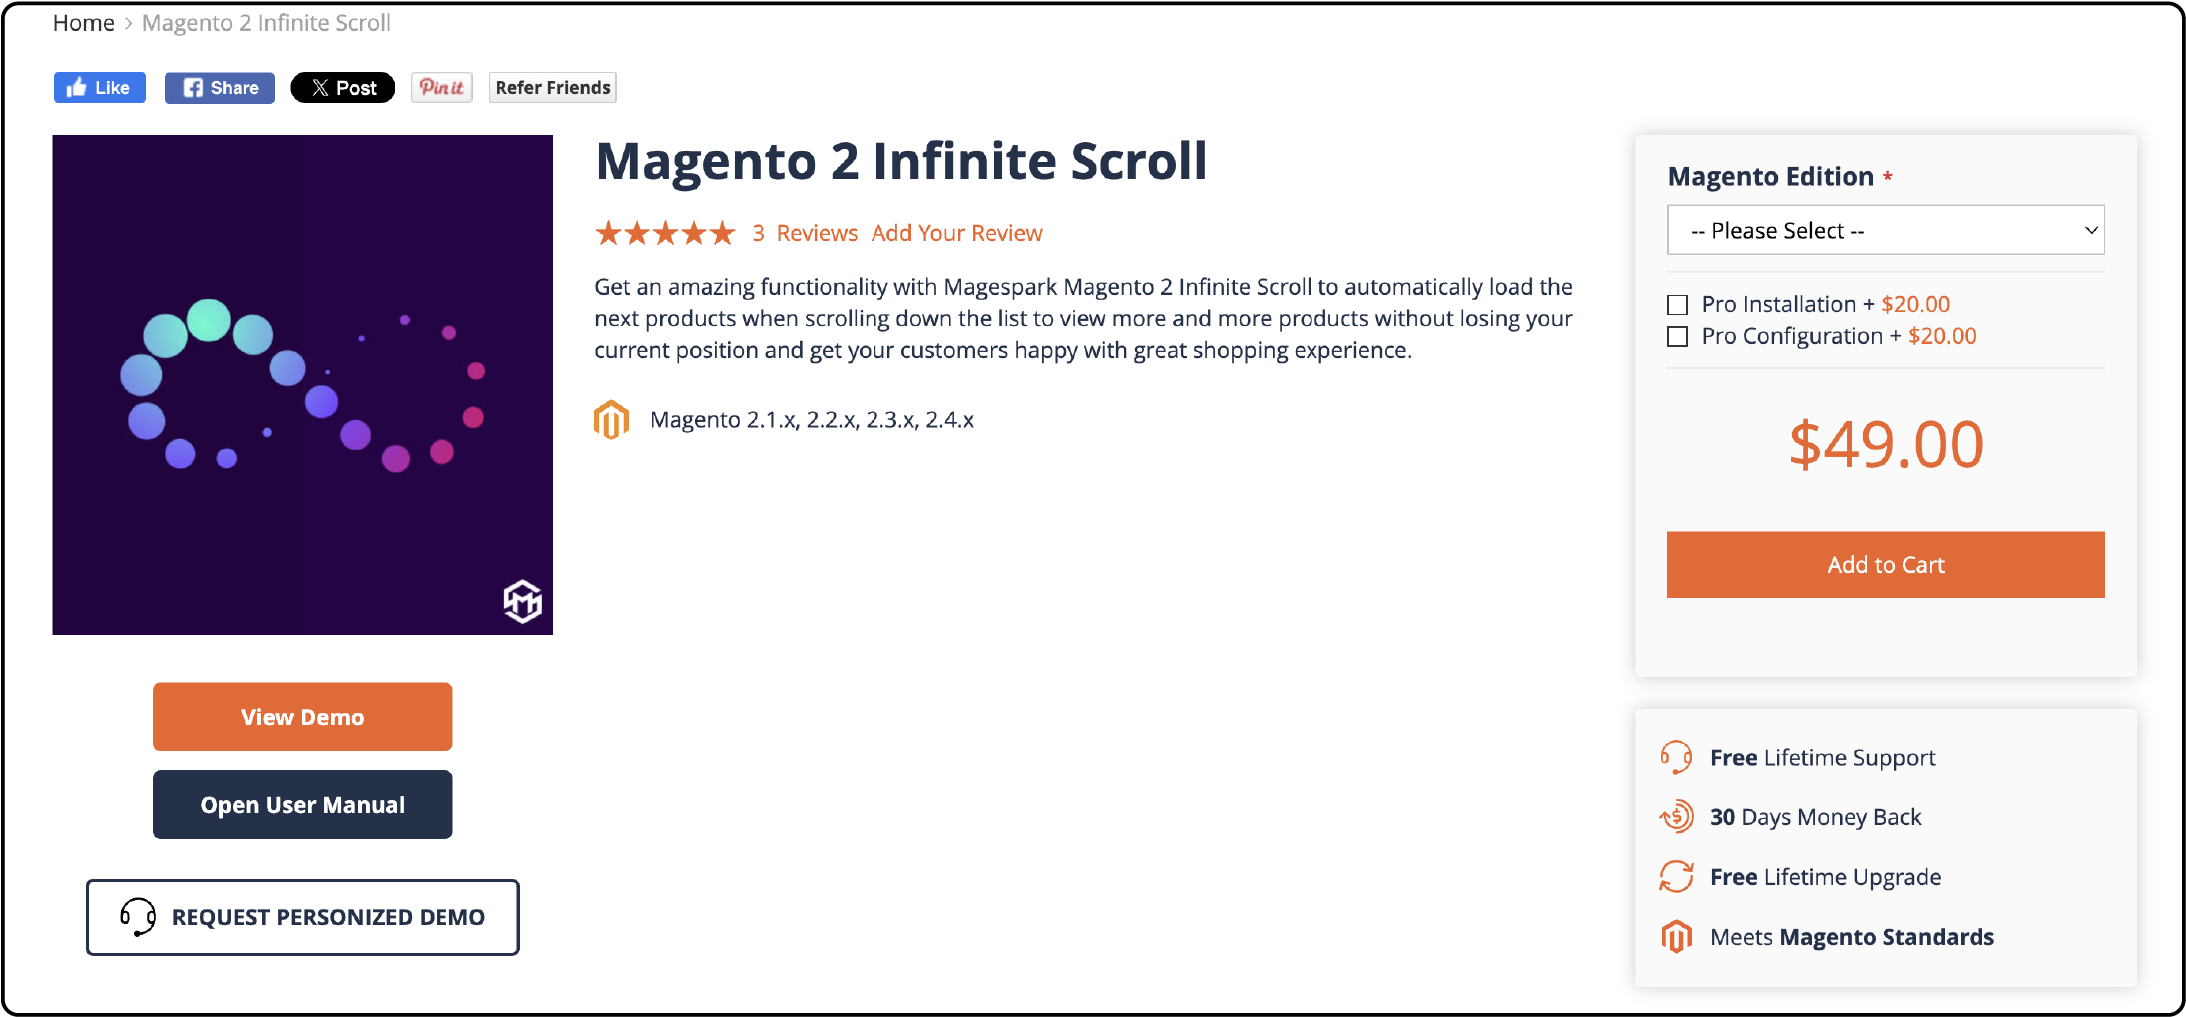 Magento Infinite Scroll by Magespark